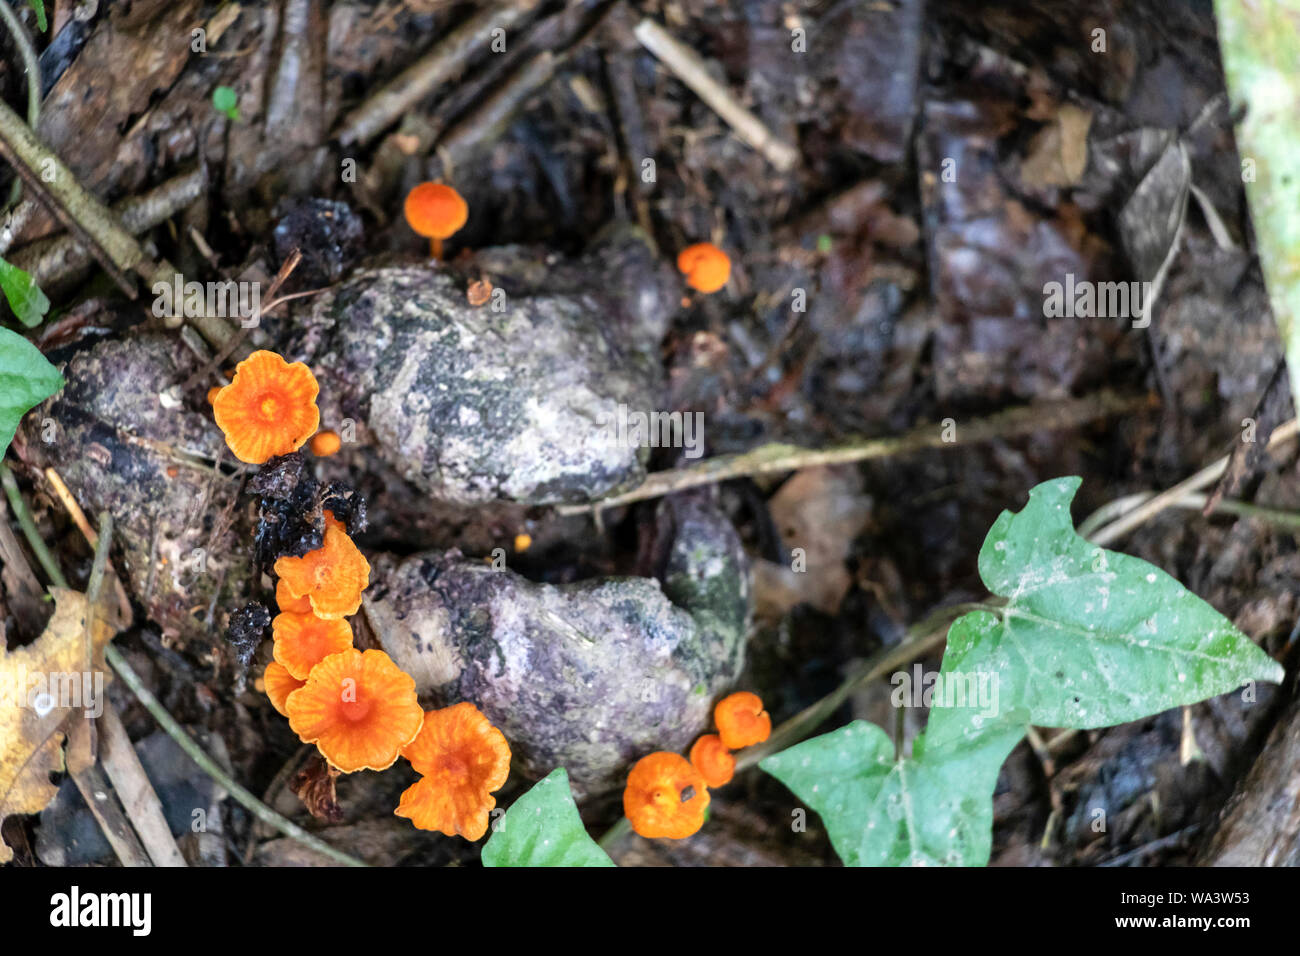 Slightly blurred nature background : Mushrooms in the Amazonian jungles, South America Stock Photo